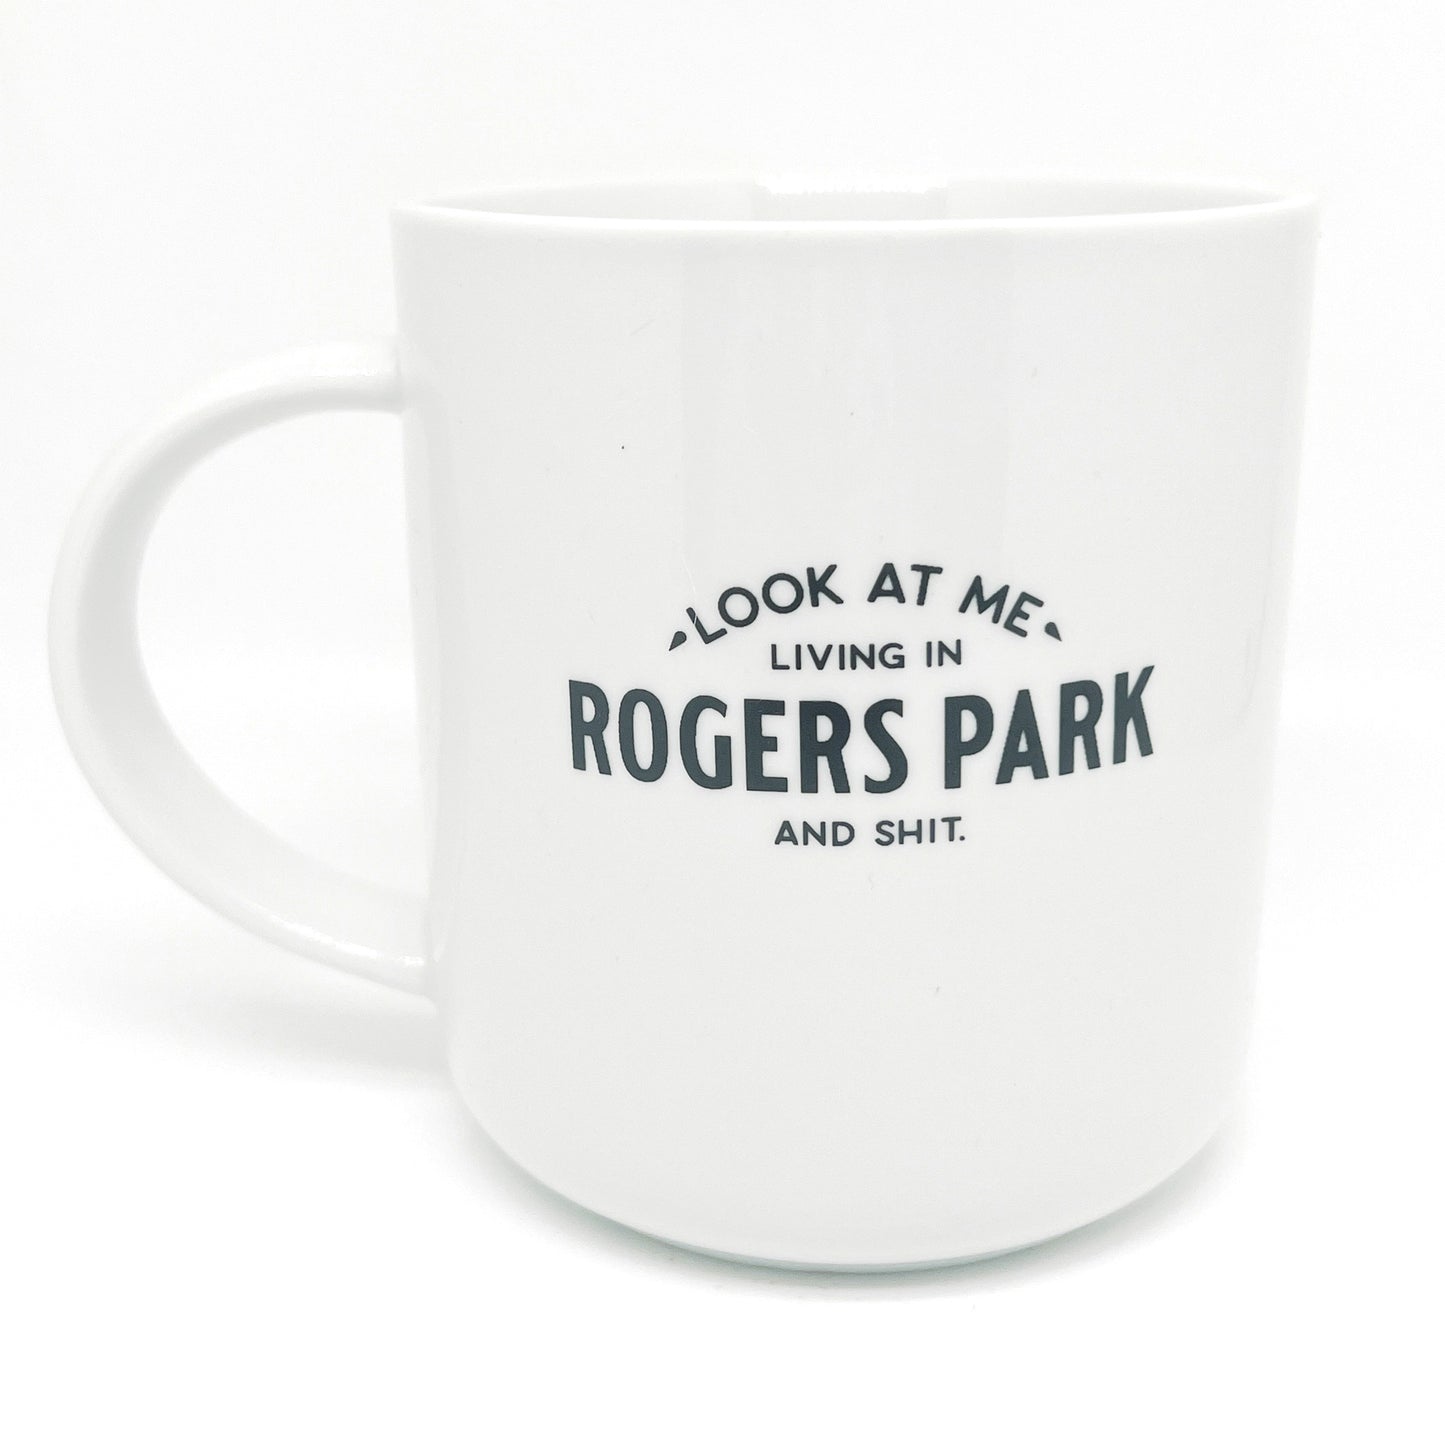 Rogers Park Mug - "- Look At Me - Living In Rogers Park And Shit."